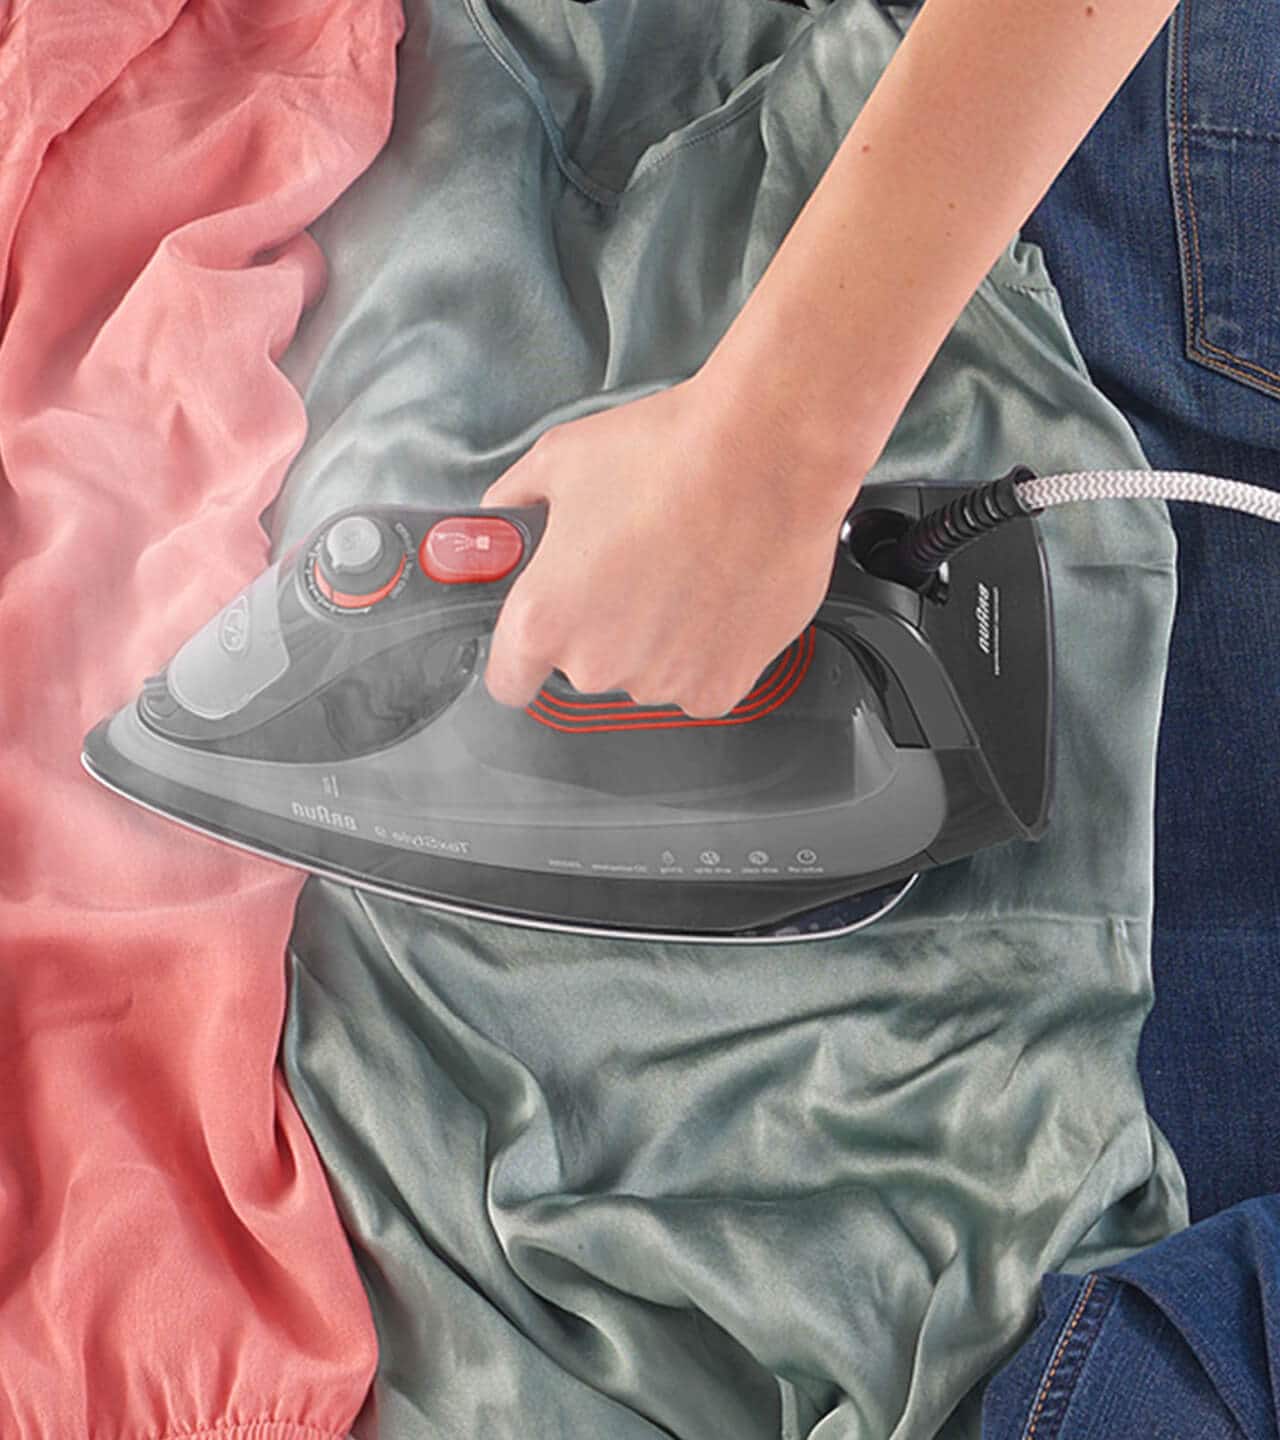 Braun TexStyle 9 steam iron with iCare technology.